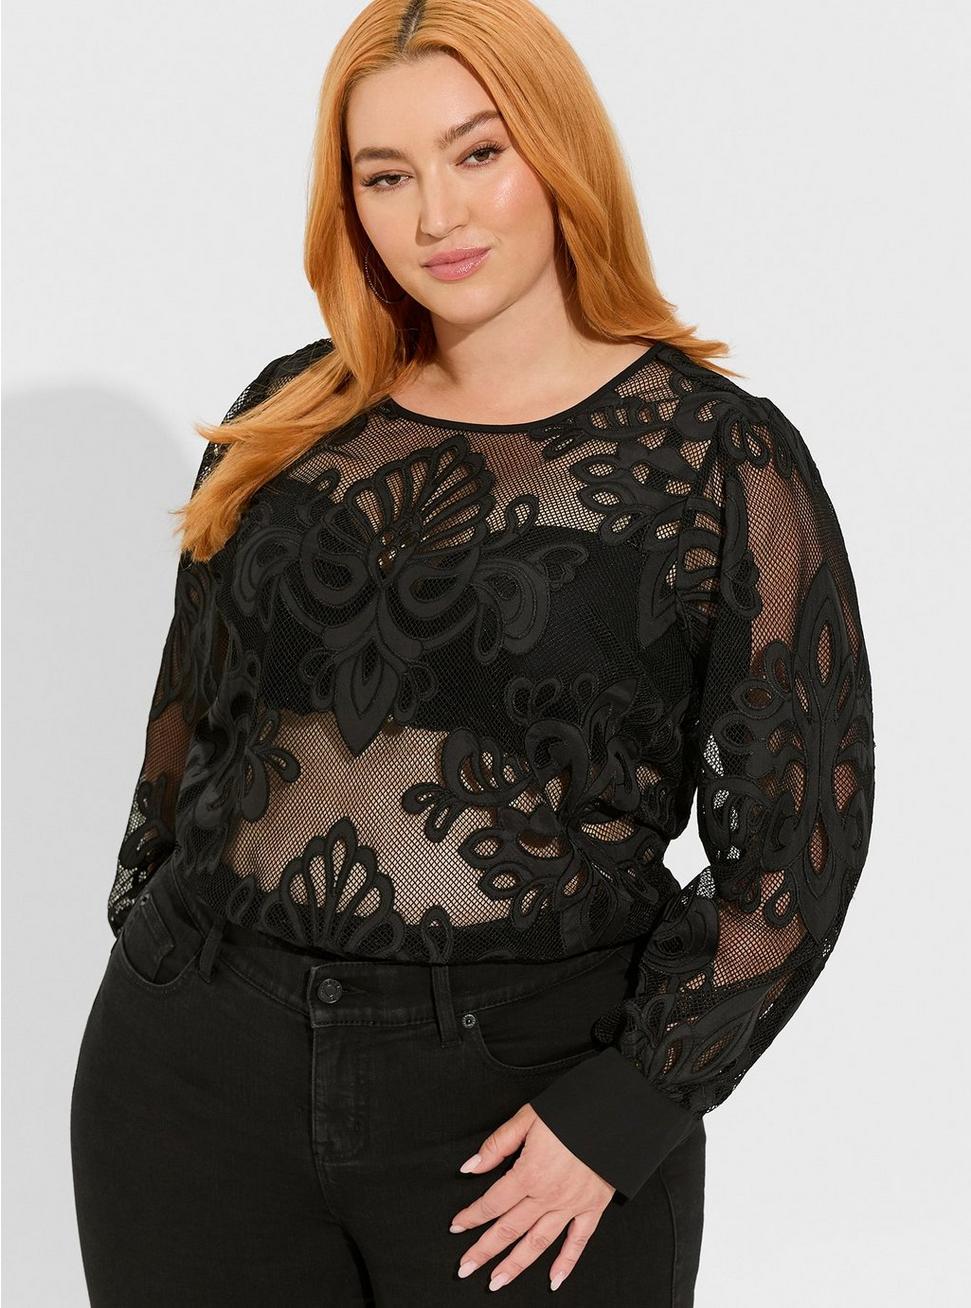 Mesh With Embroidery Long Sleeve Blouse, DEEP BLACK, alternate